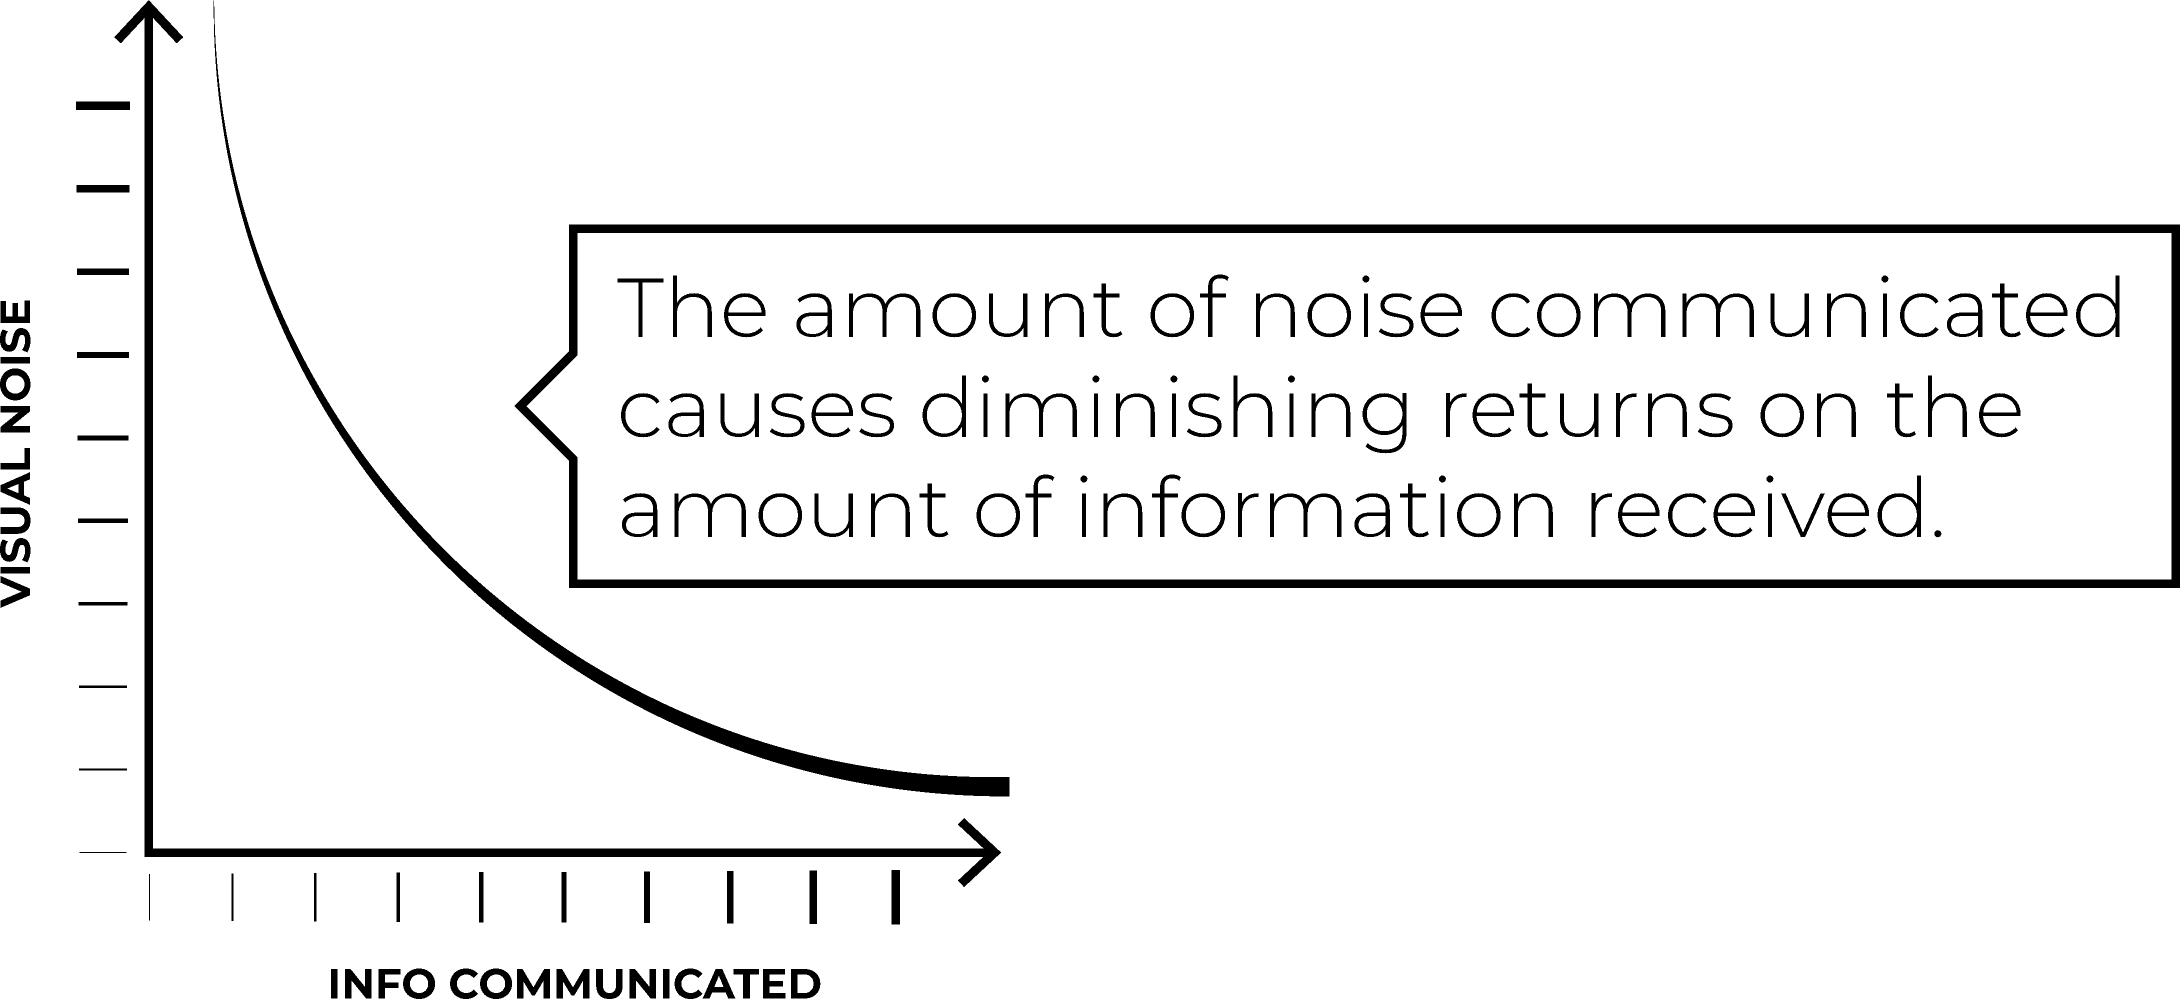 The amount of noise communicated causes deminishing returns on the amount of information received.